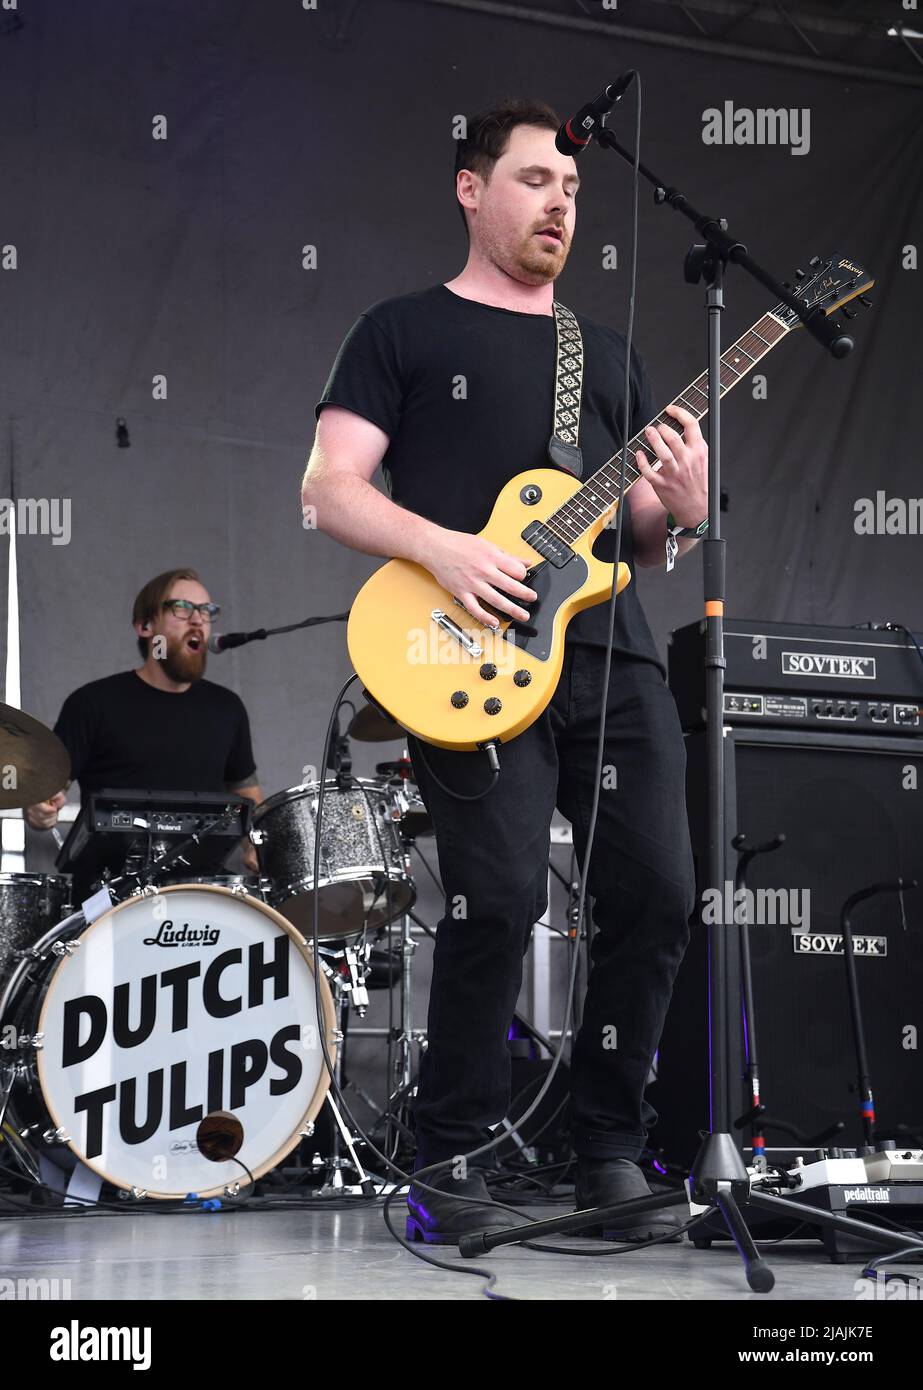 The Dutch Tulips, Matthew Freake, Justin Mantell, and brothers Matthew and John Holland, are shown performing on stage during a live concert appearance at the Boston Calling music festival held in Allston, Massachusetts on May 29, 2022. Stock Photo